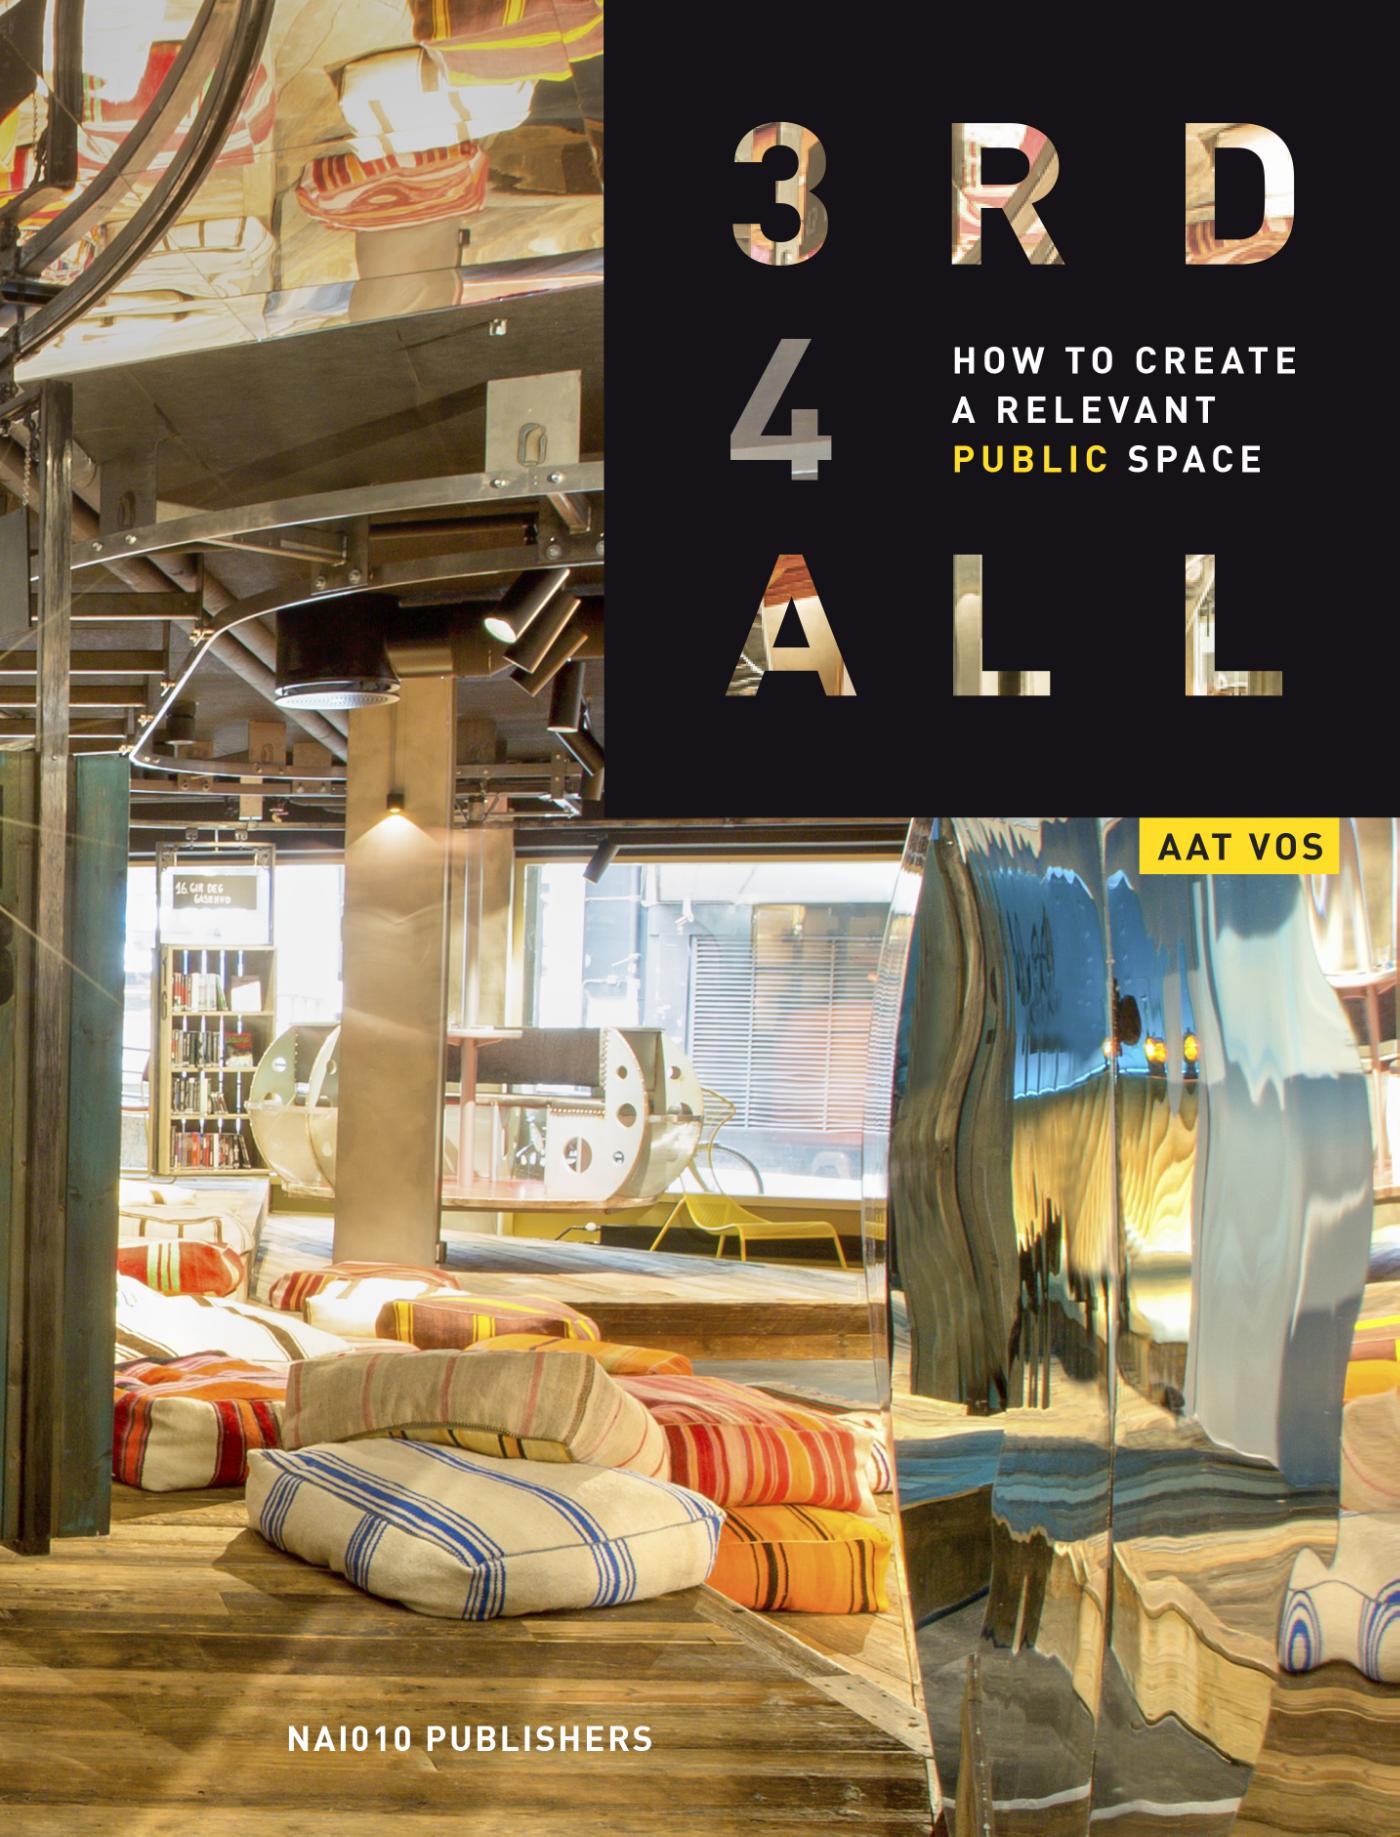 How to make a relevant public space (Ebook)